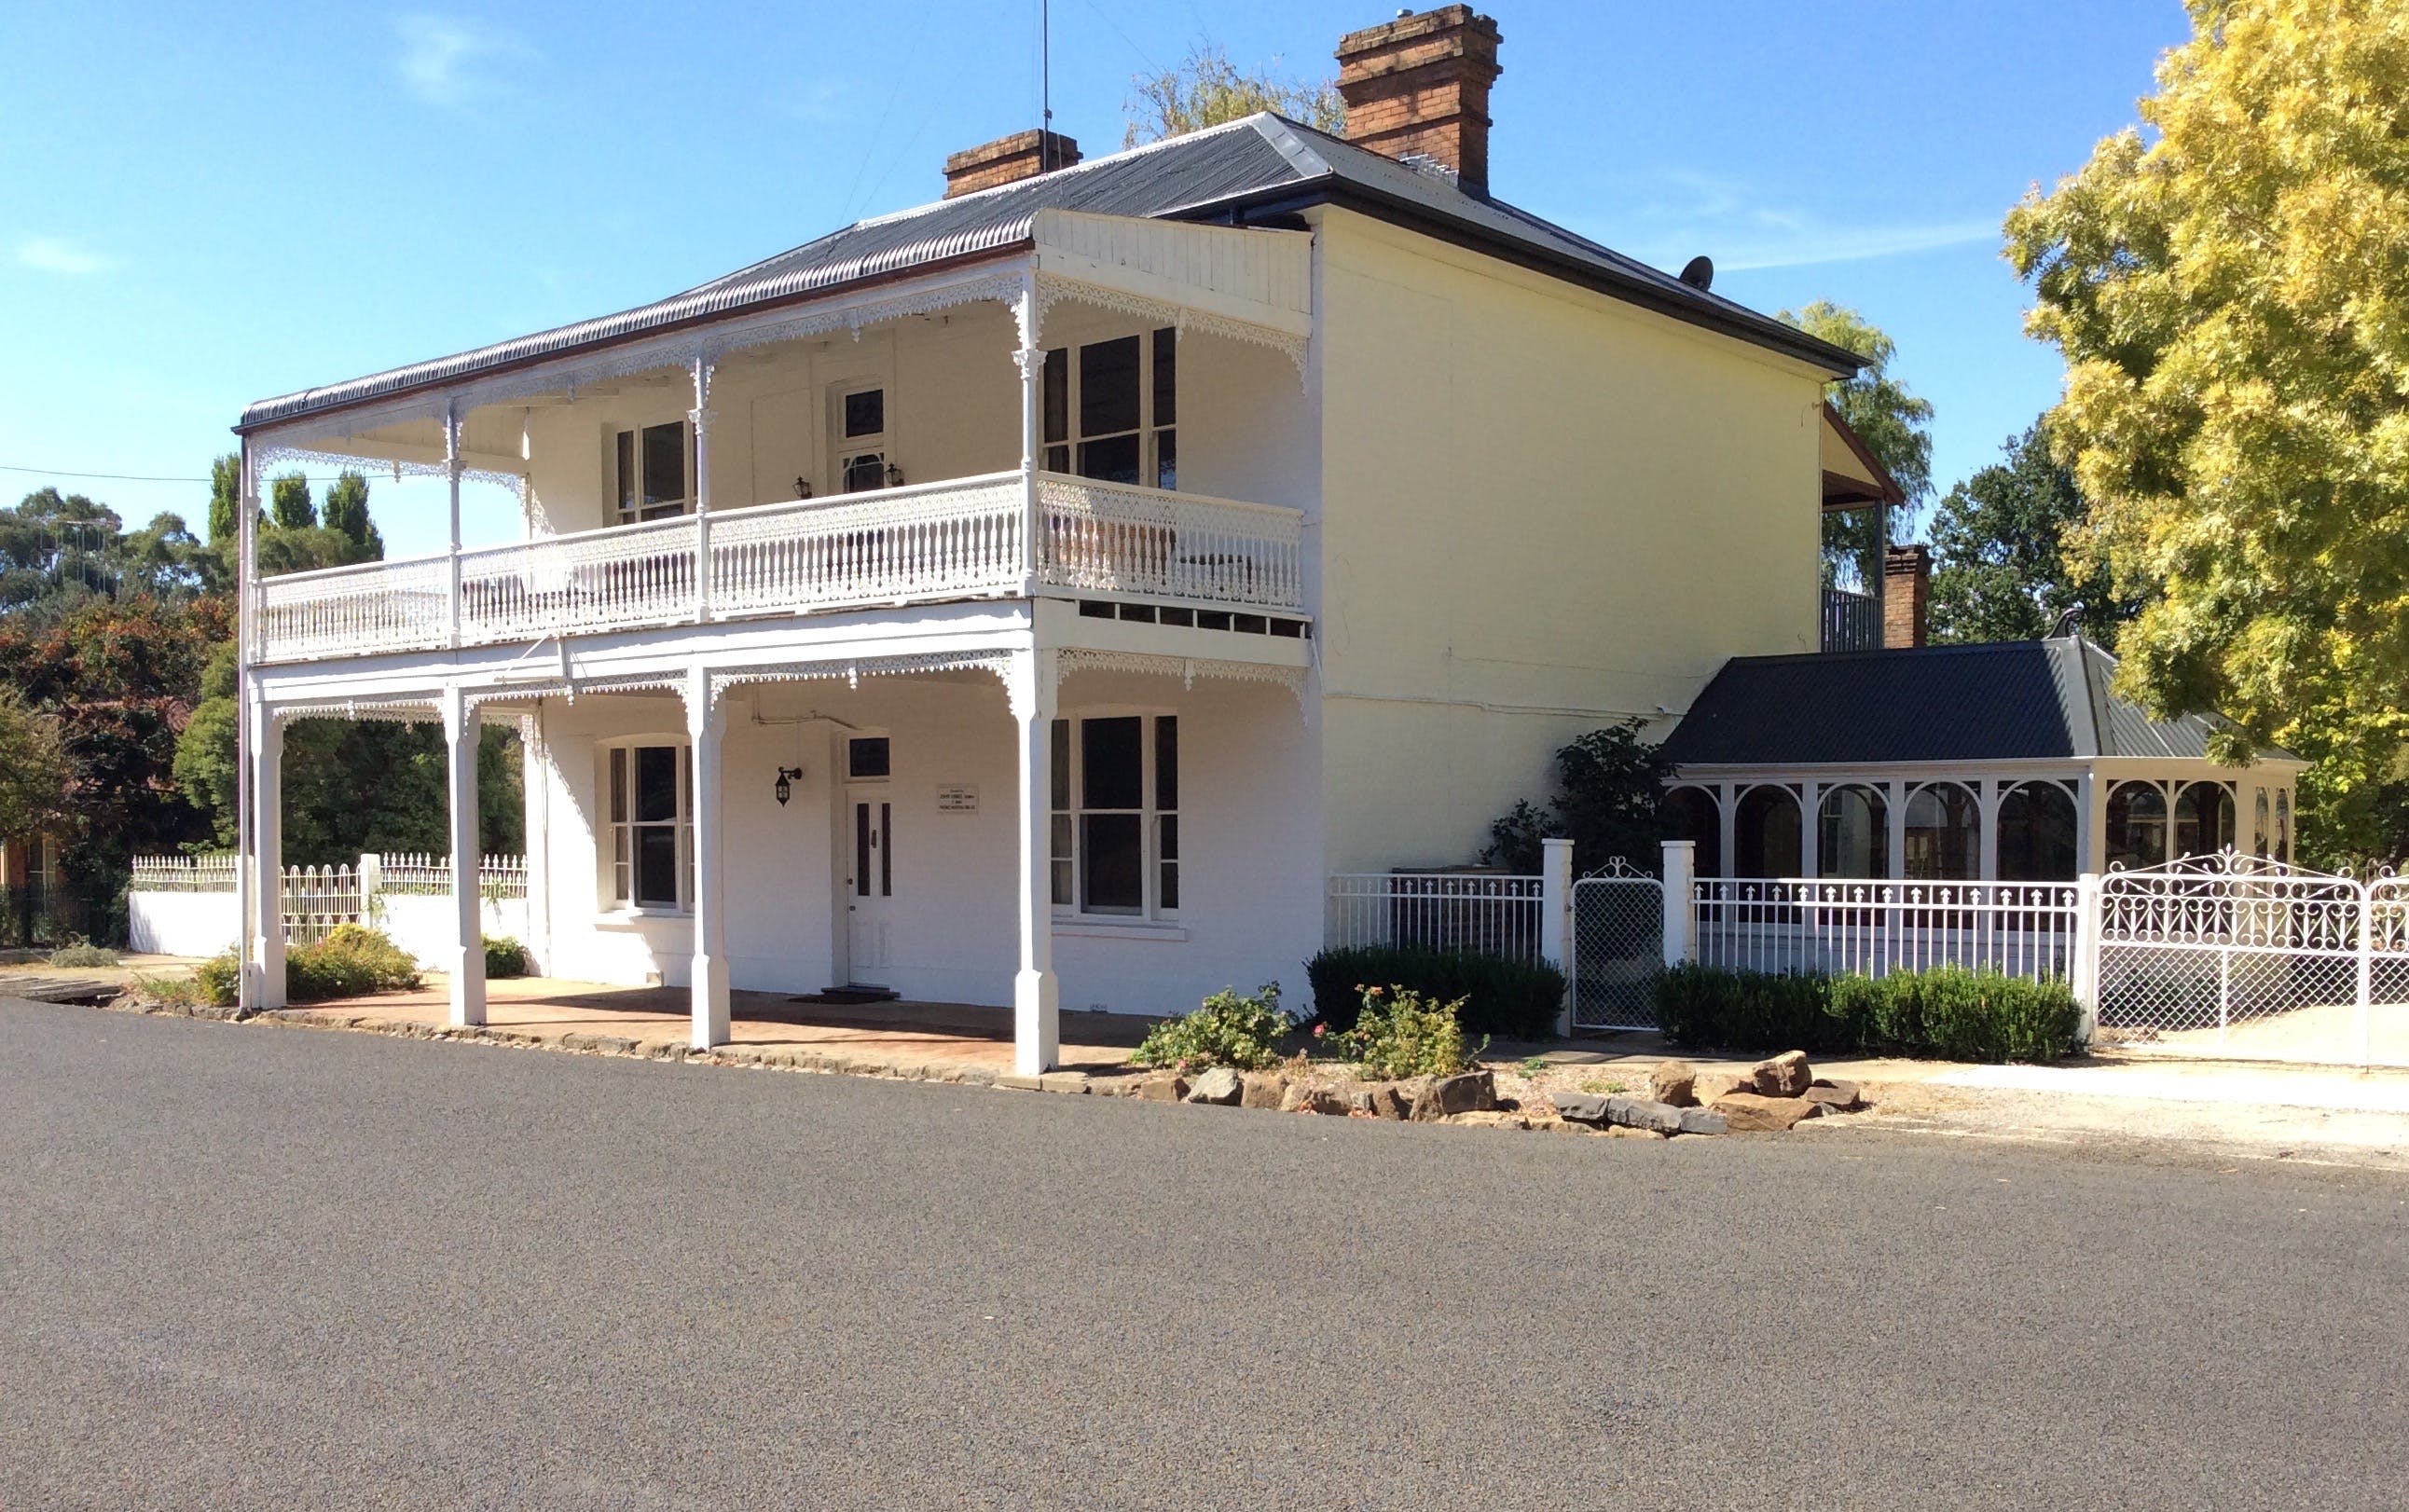 The White House Carcoar - Accommodation Directory